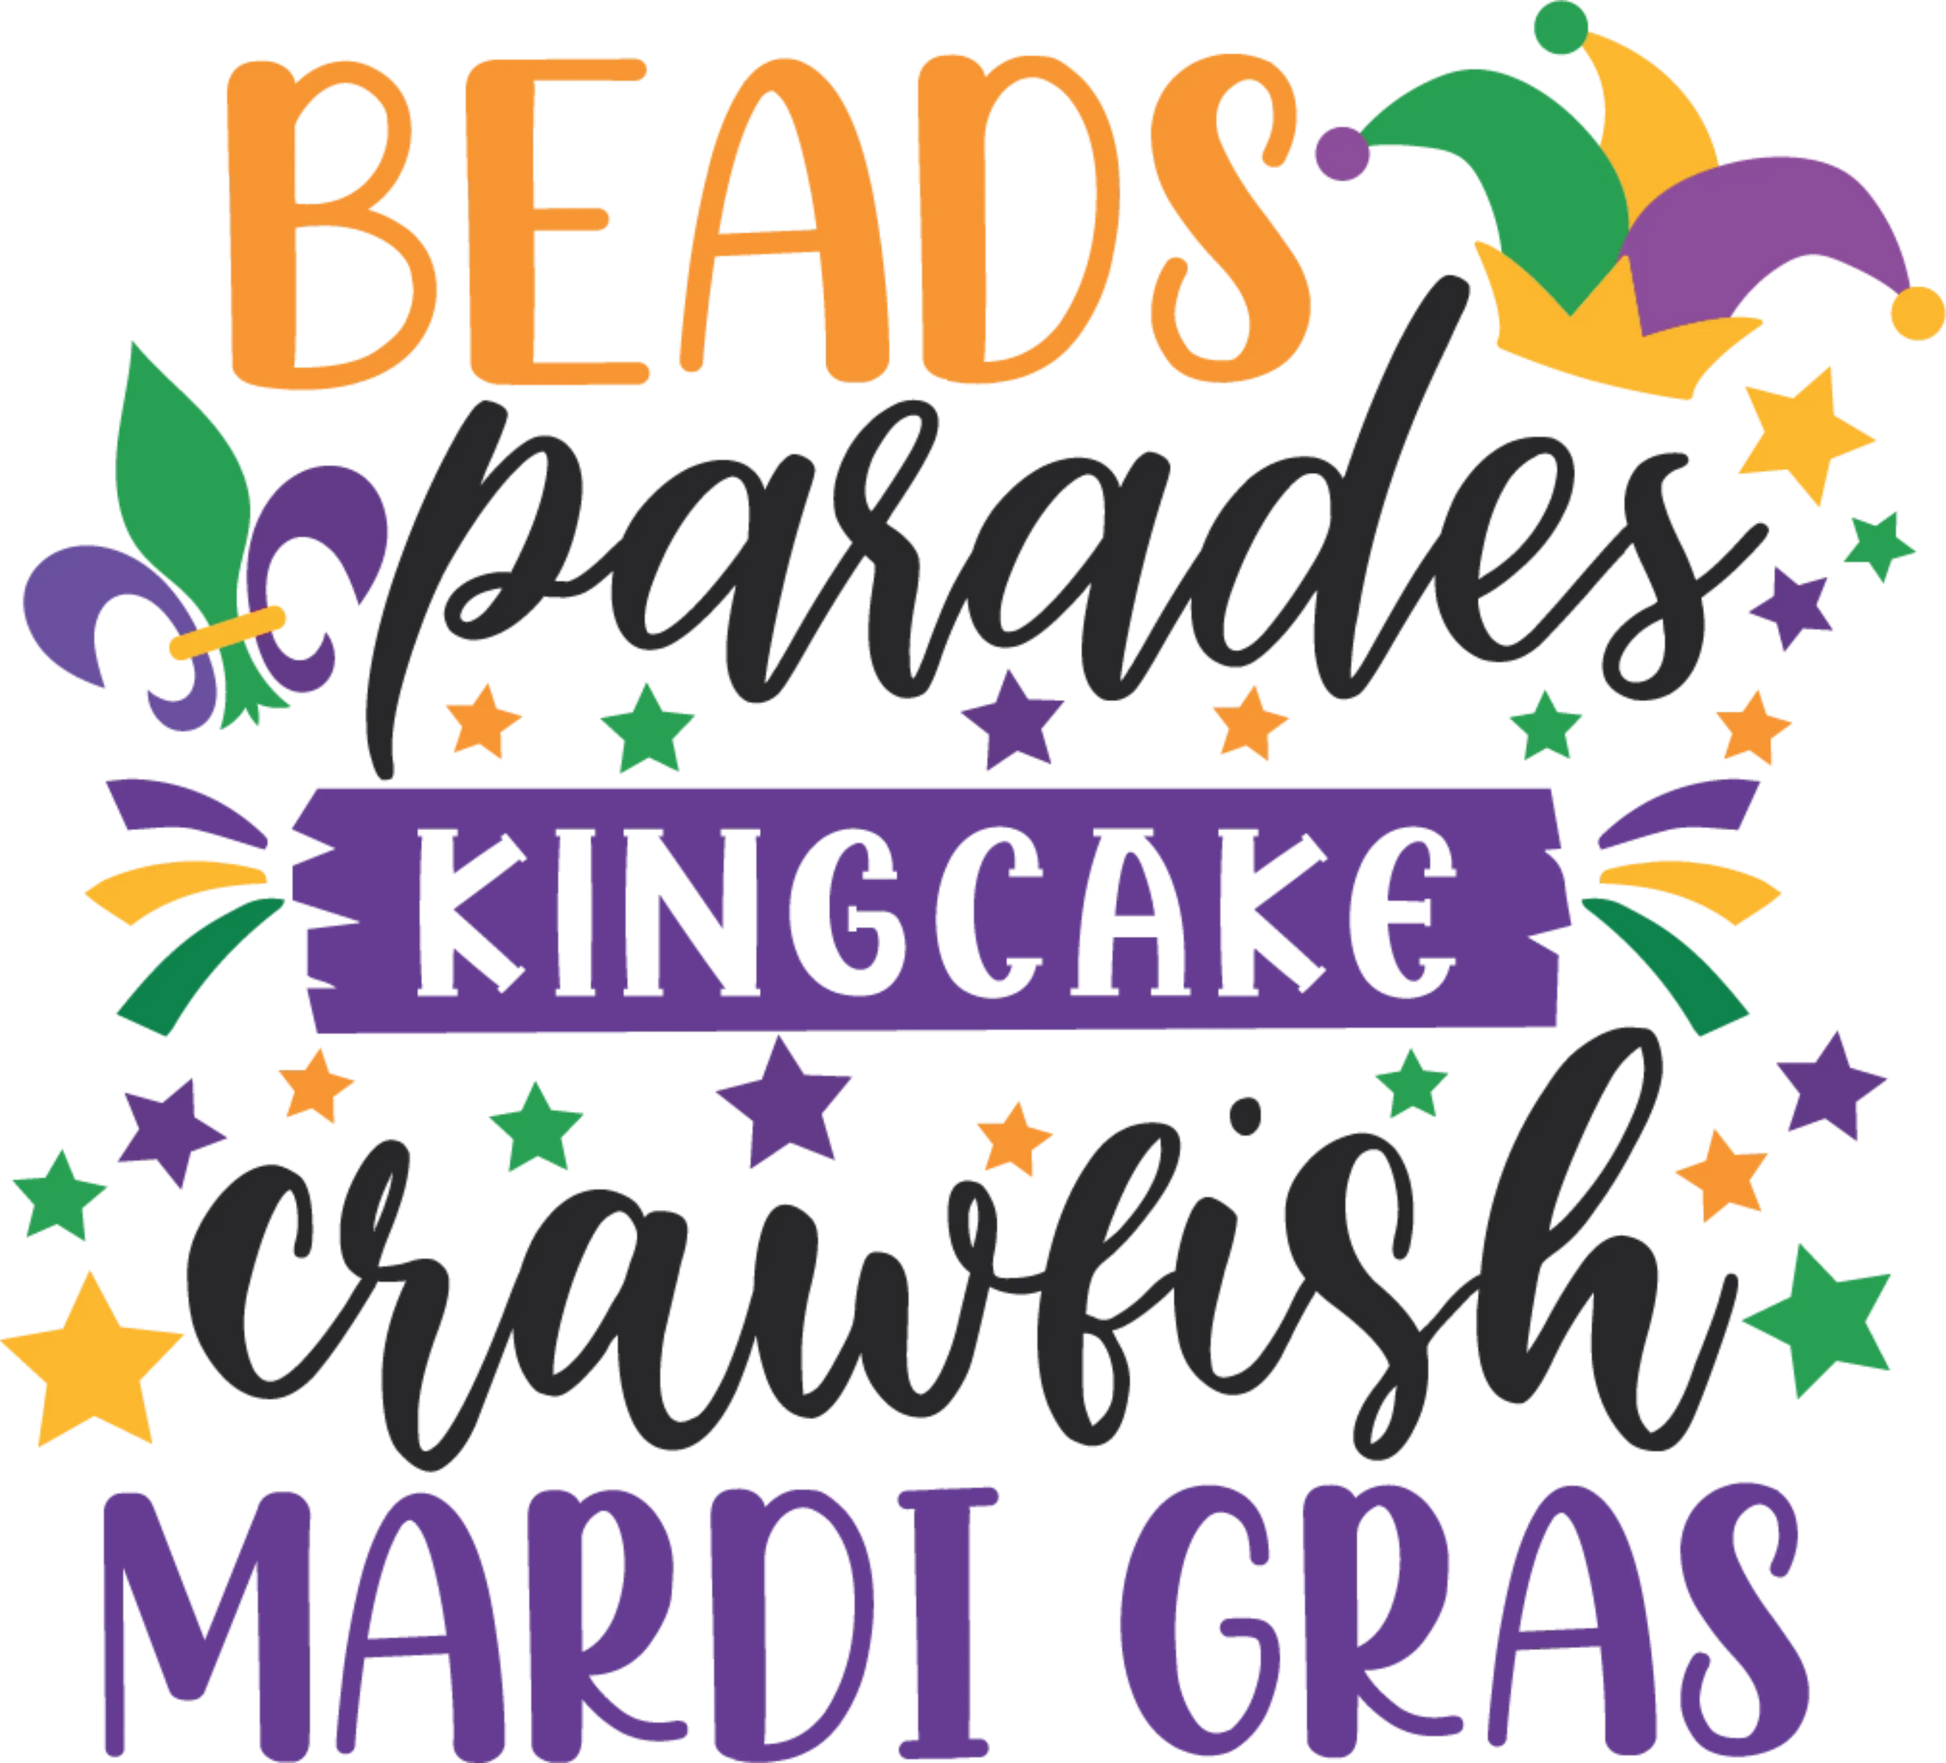 MG 10 - "All Things Mardi Gras" DTF Transfer, DTF Transfer, Apparel & Accessories, Ace DTF